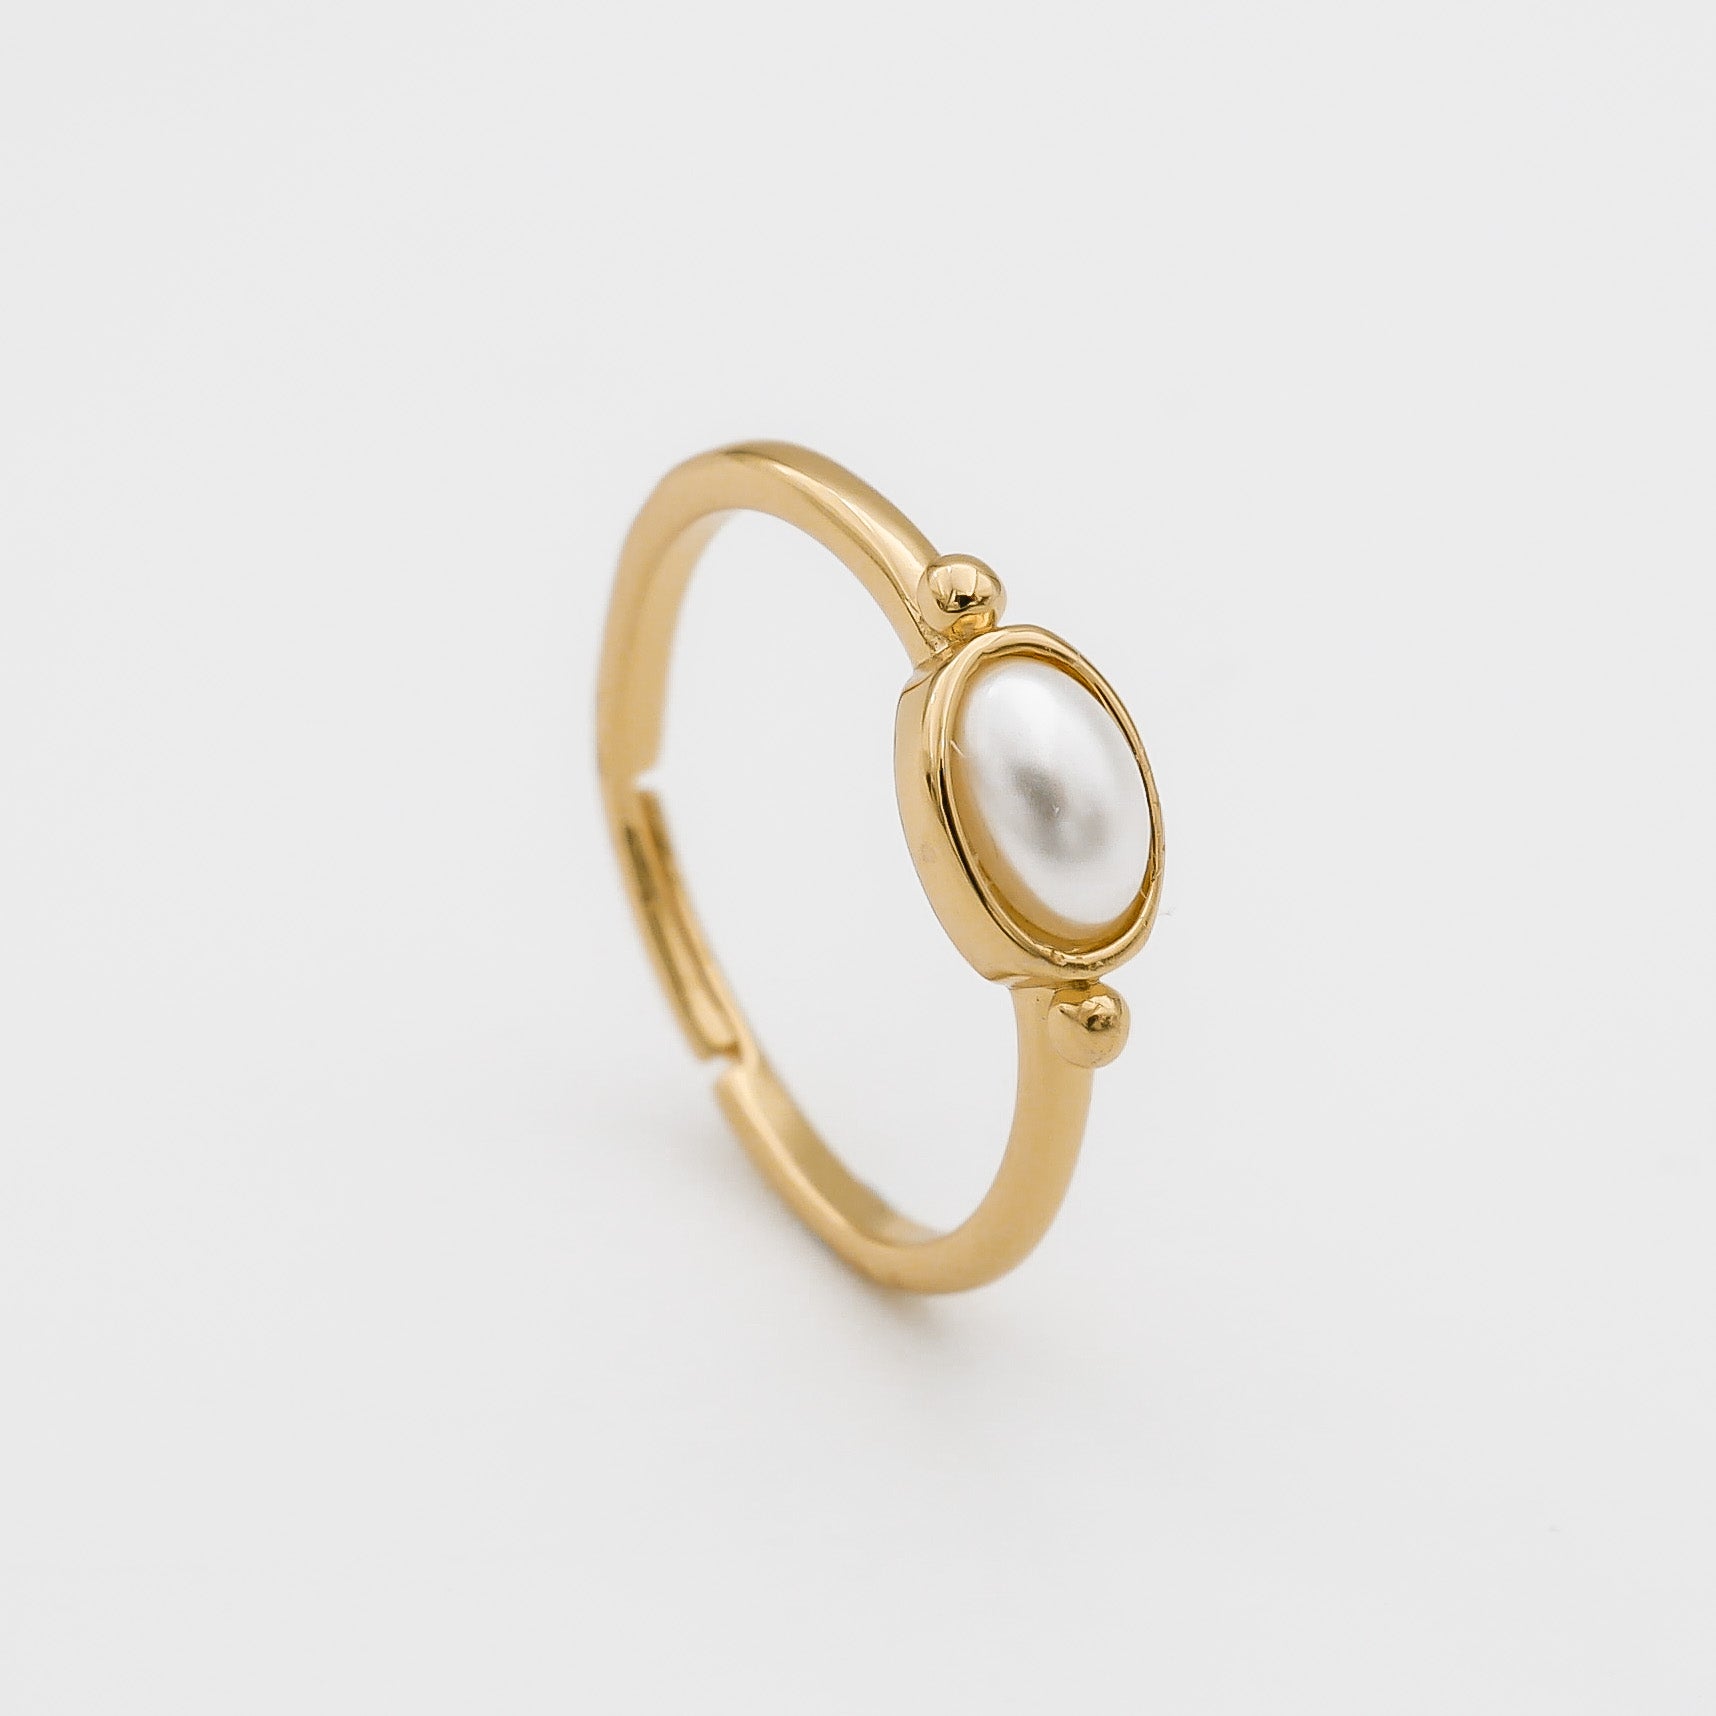 Birthstone ring gold for June with pearl